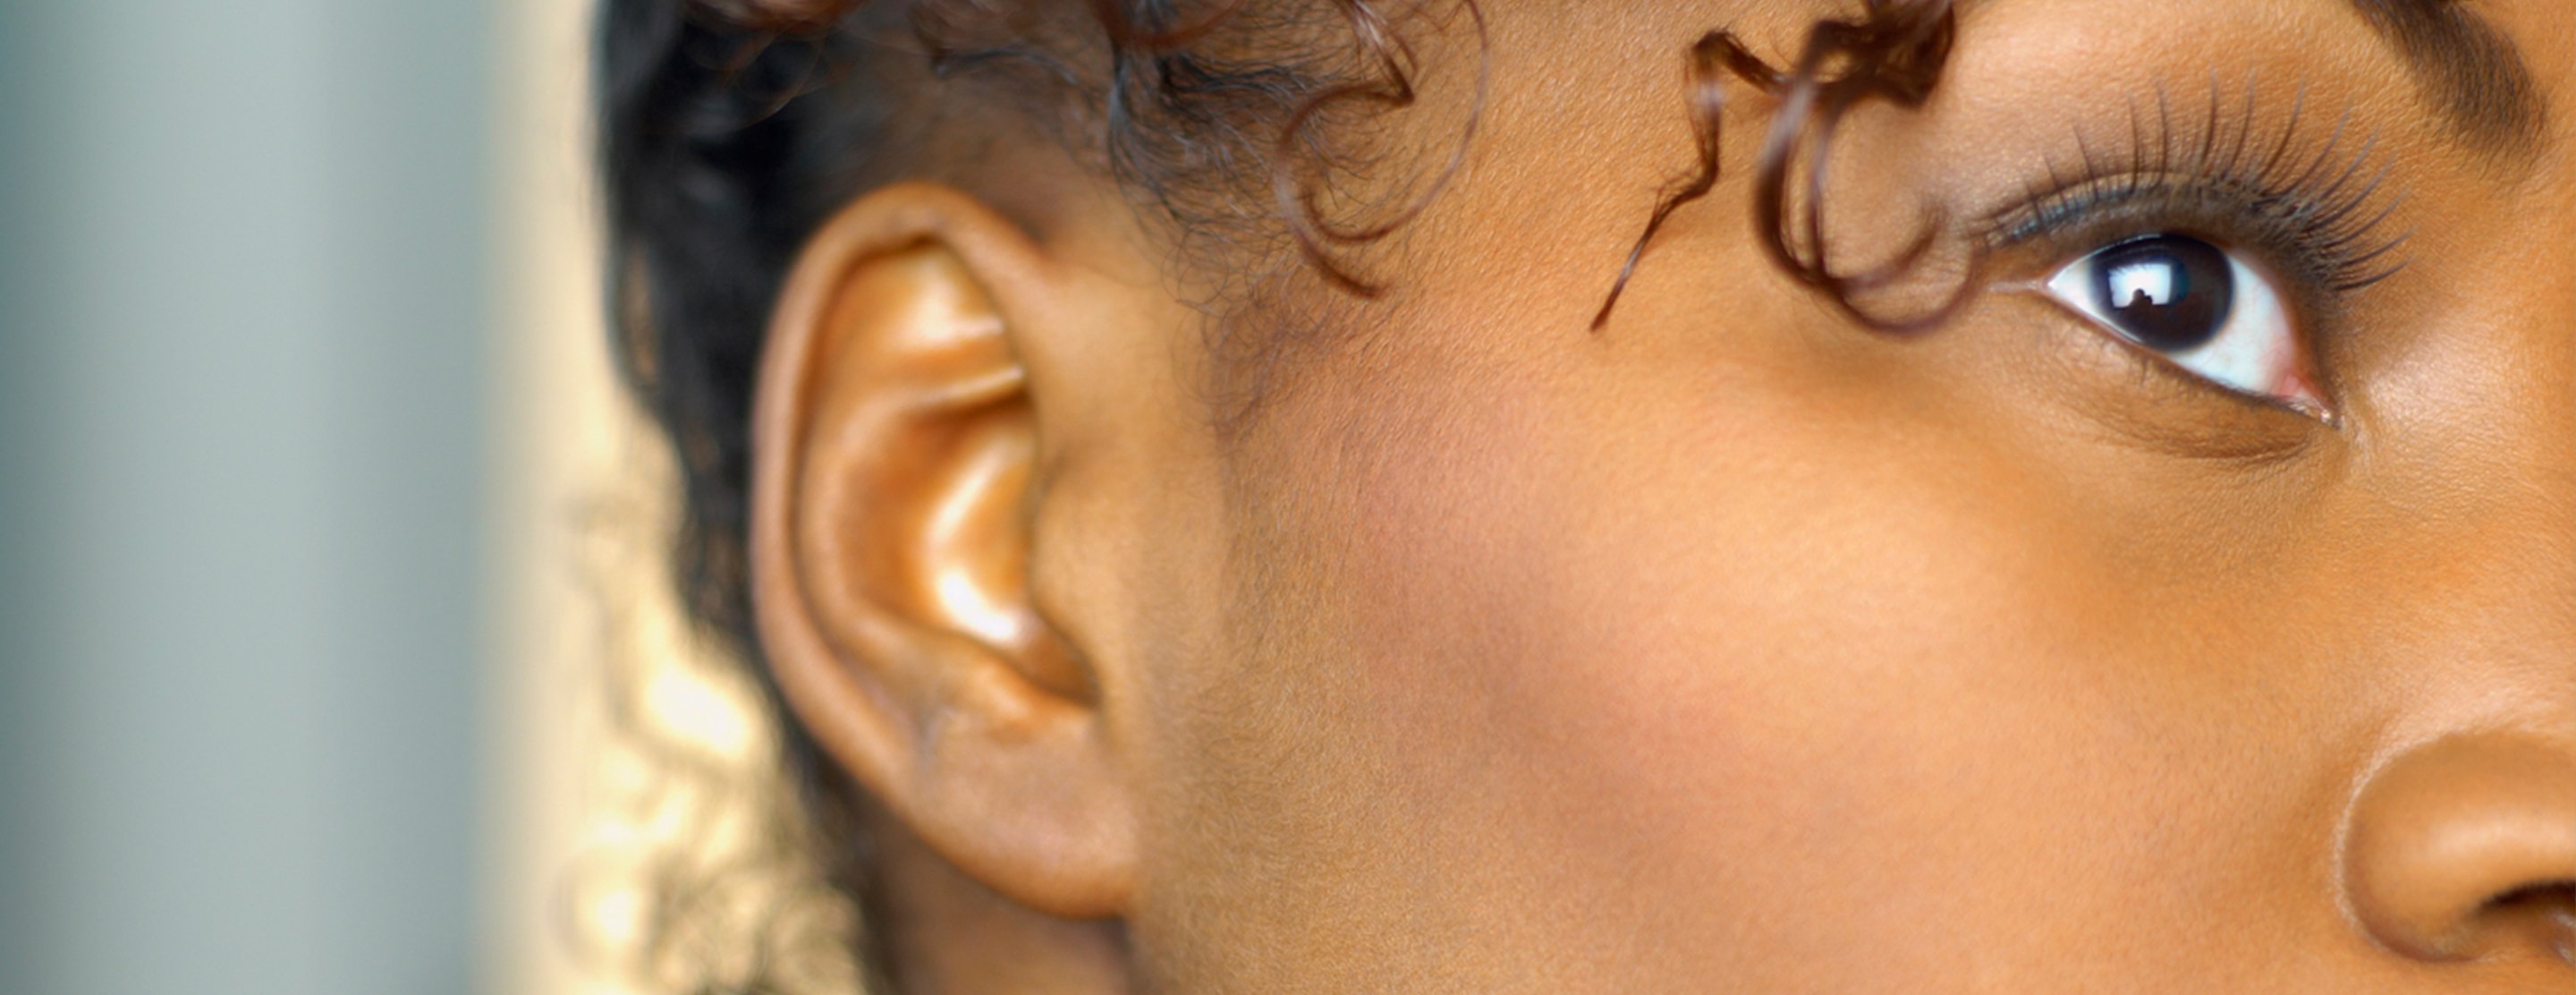 Ear Reshaping | Conditions & Treatments | UCSF Health